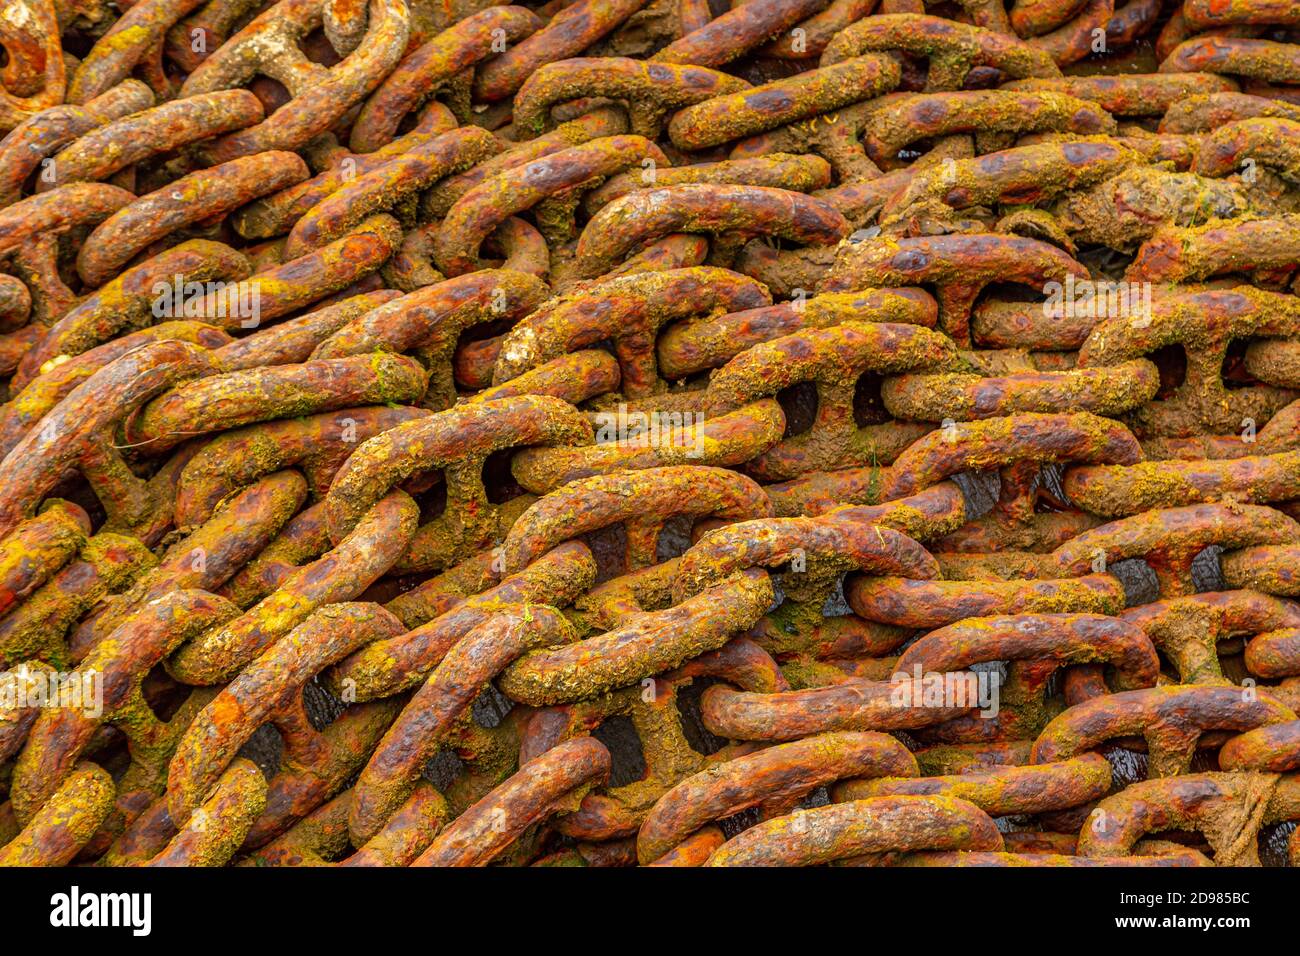 Old rusty anchor chain. Stock Photo